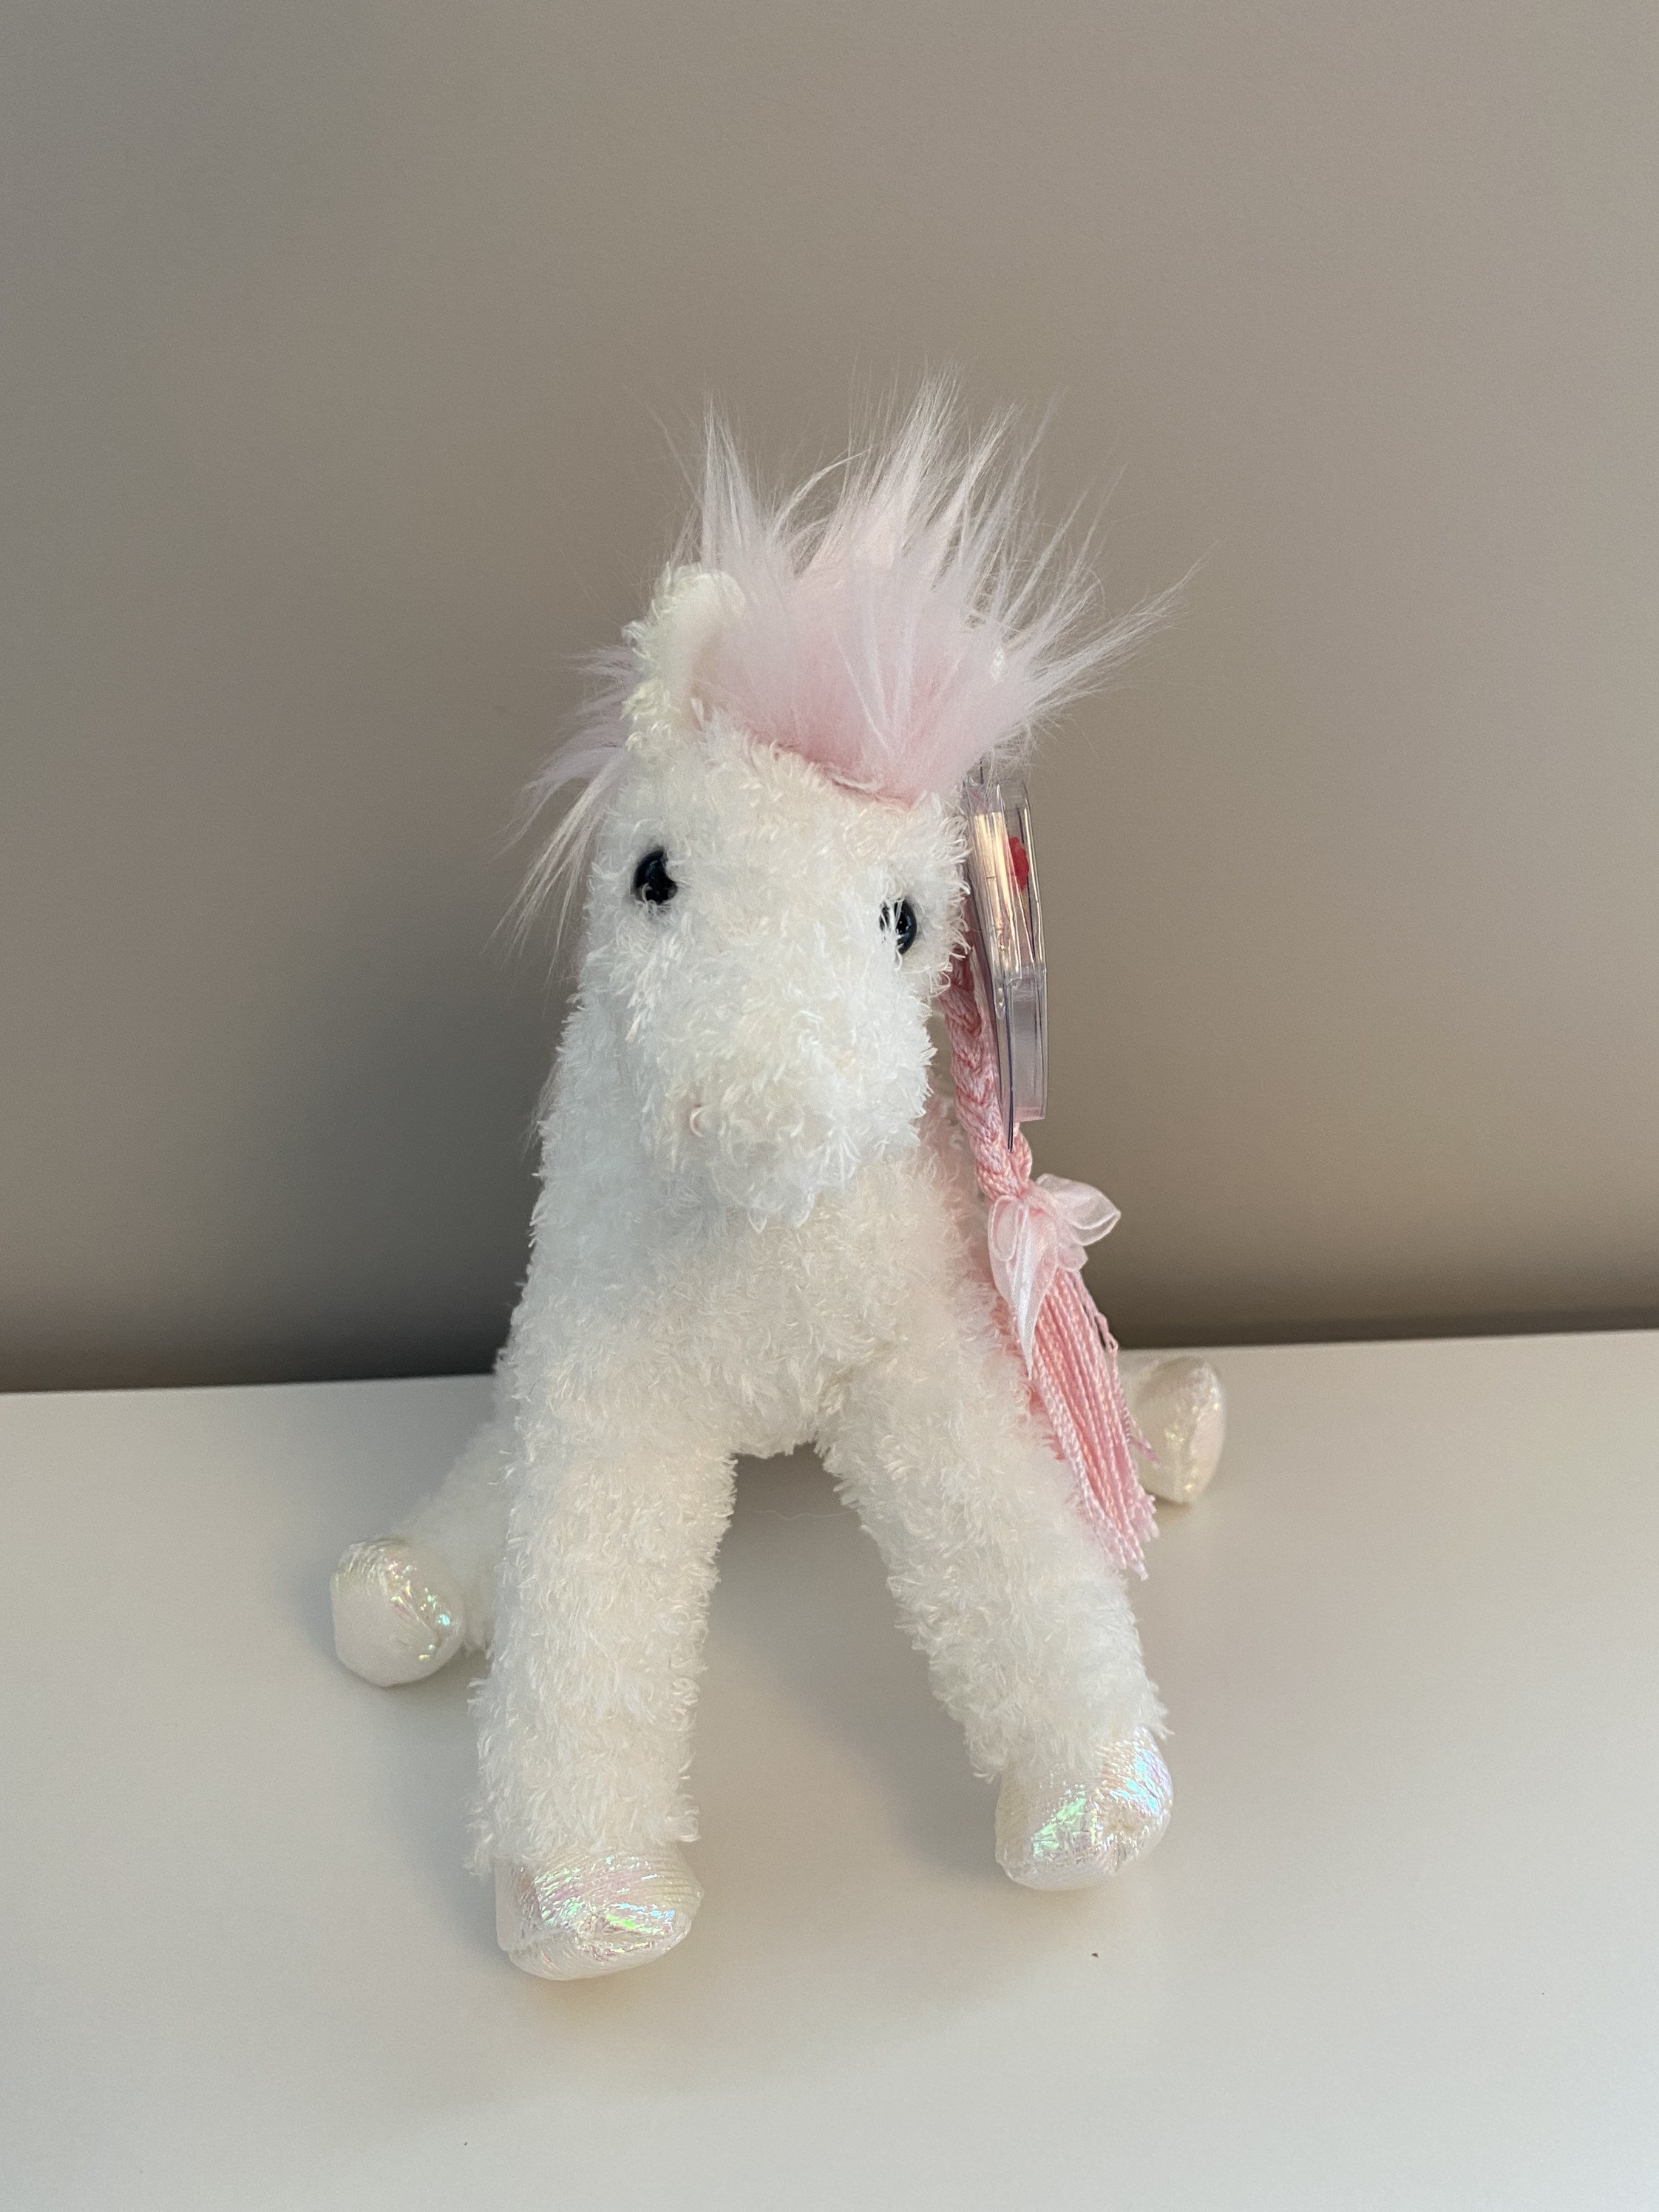 Brand New PRISTINE CLEAN MINT w/ Mint Tags Ty Beanie Baby Oats the Horse 